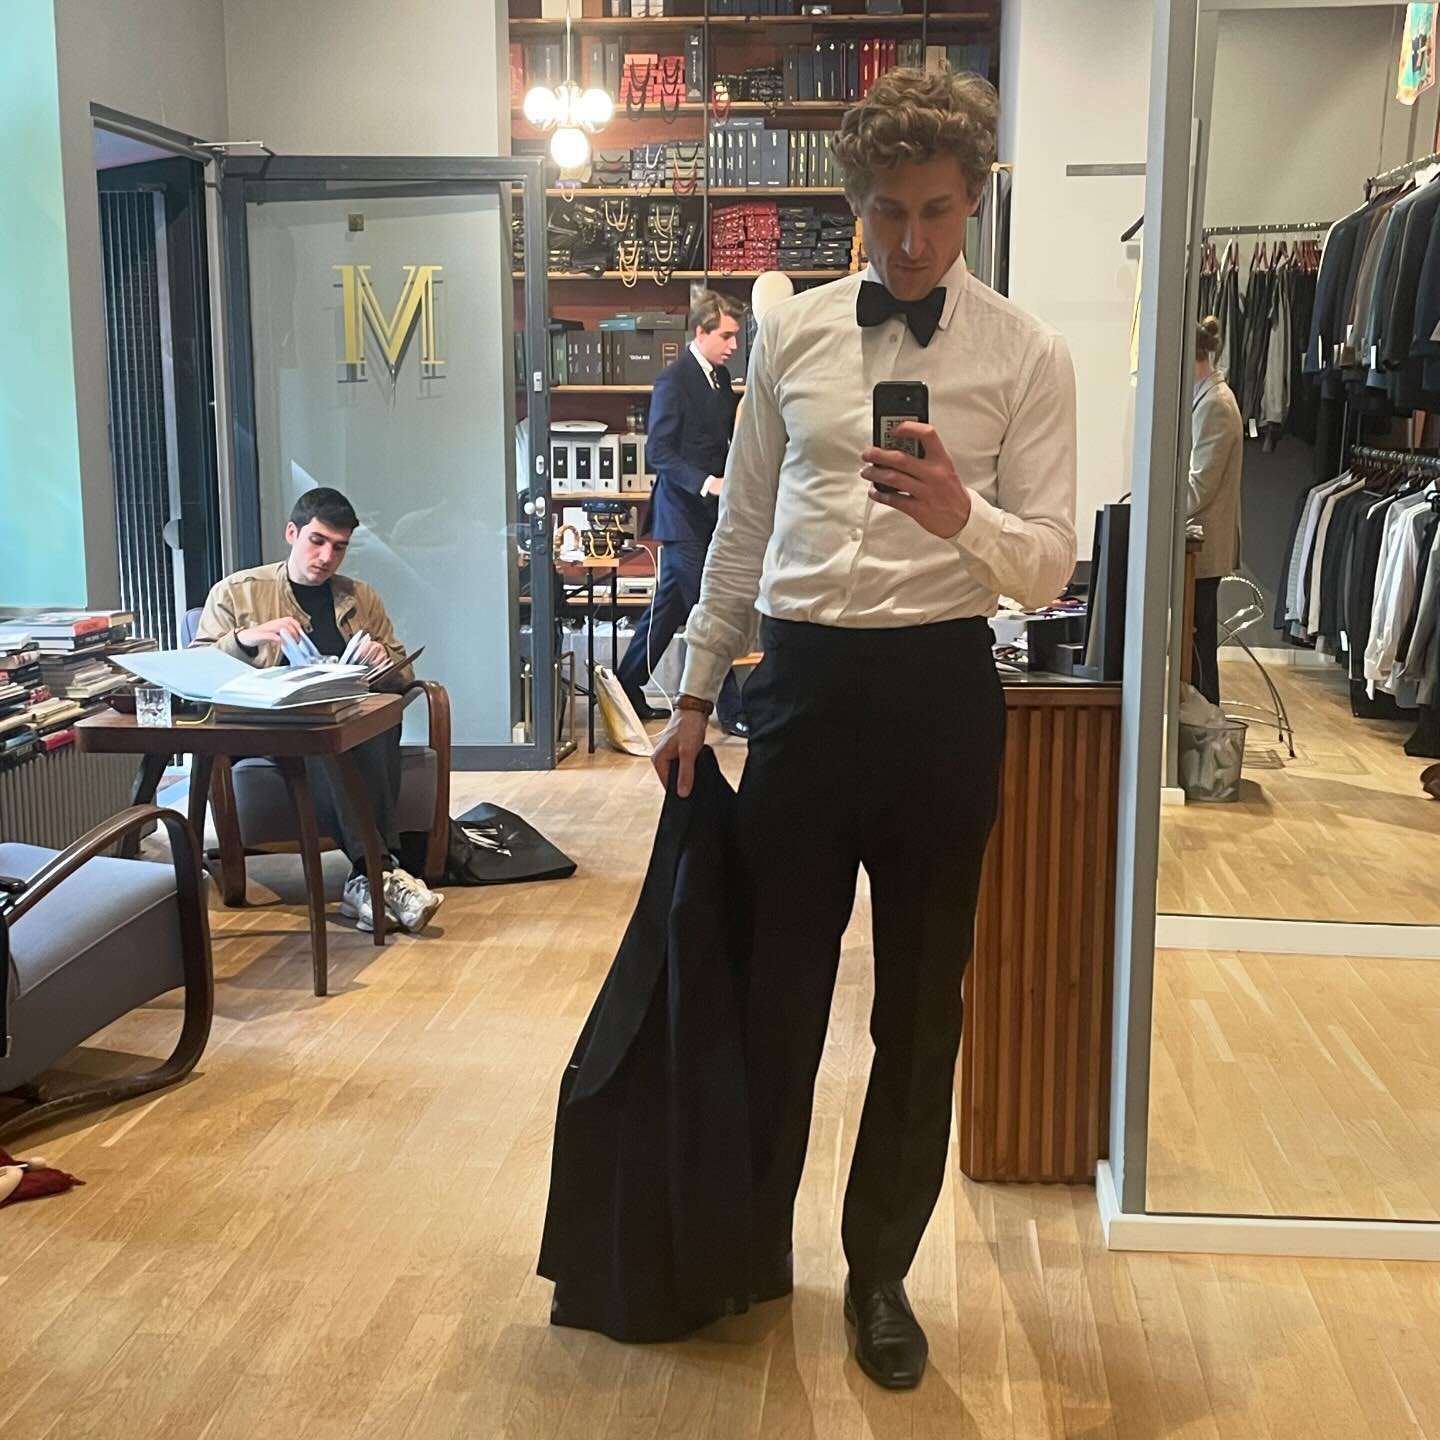 🤵 POWER DRESSING for the AWARDS 🤵

Nothing quite makes you feel so awesome than a really good fitted suit. There&rsquo;s something about dressing up, looking smart and making an effort that communicates both to oneself and to others you mean busine